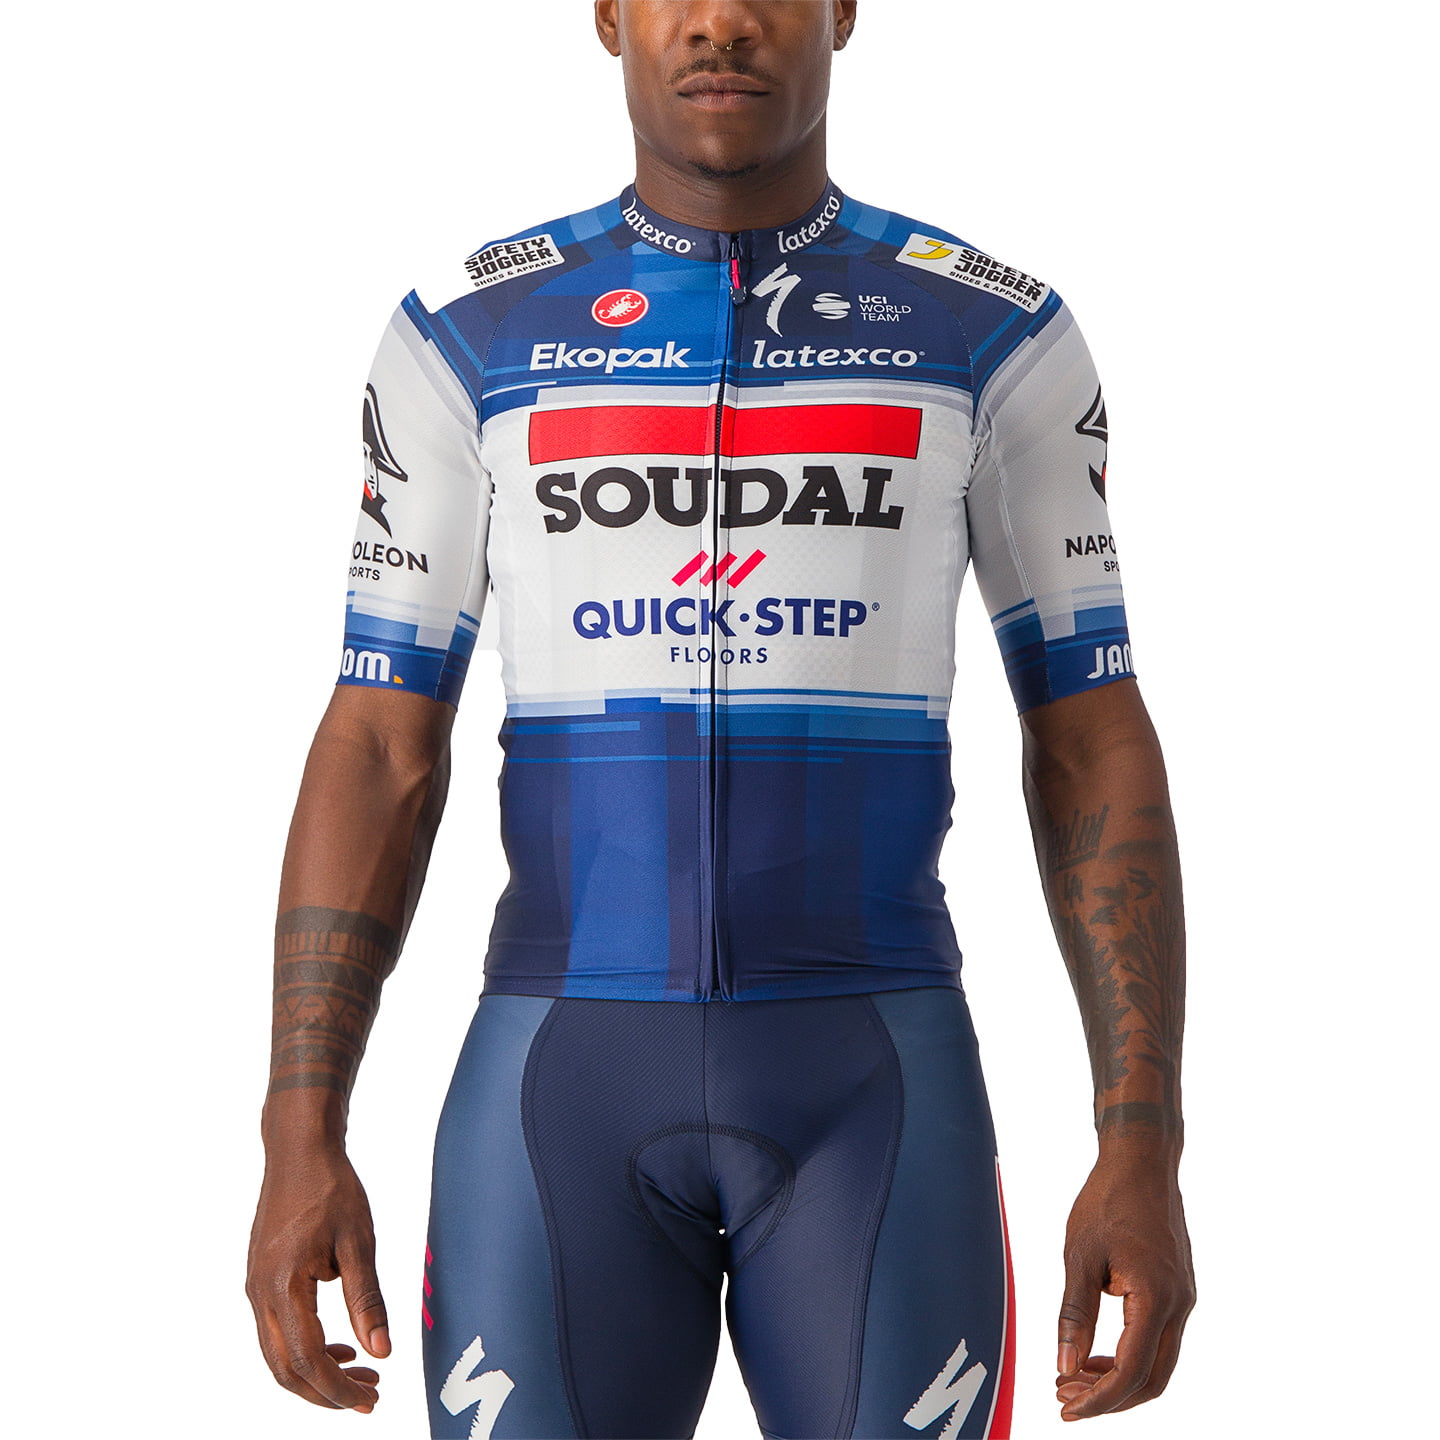 SOUDAL QUICK-STEP Aero Race 6.1 2023 Short Sleeve Jersey, for men, size L, Cycling shirt, Cycle clothing